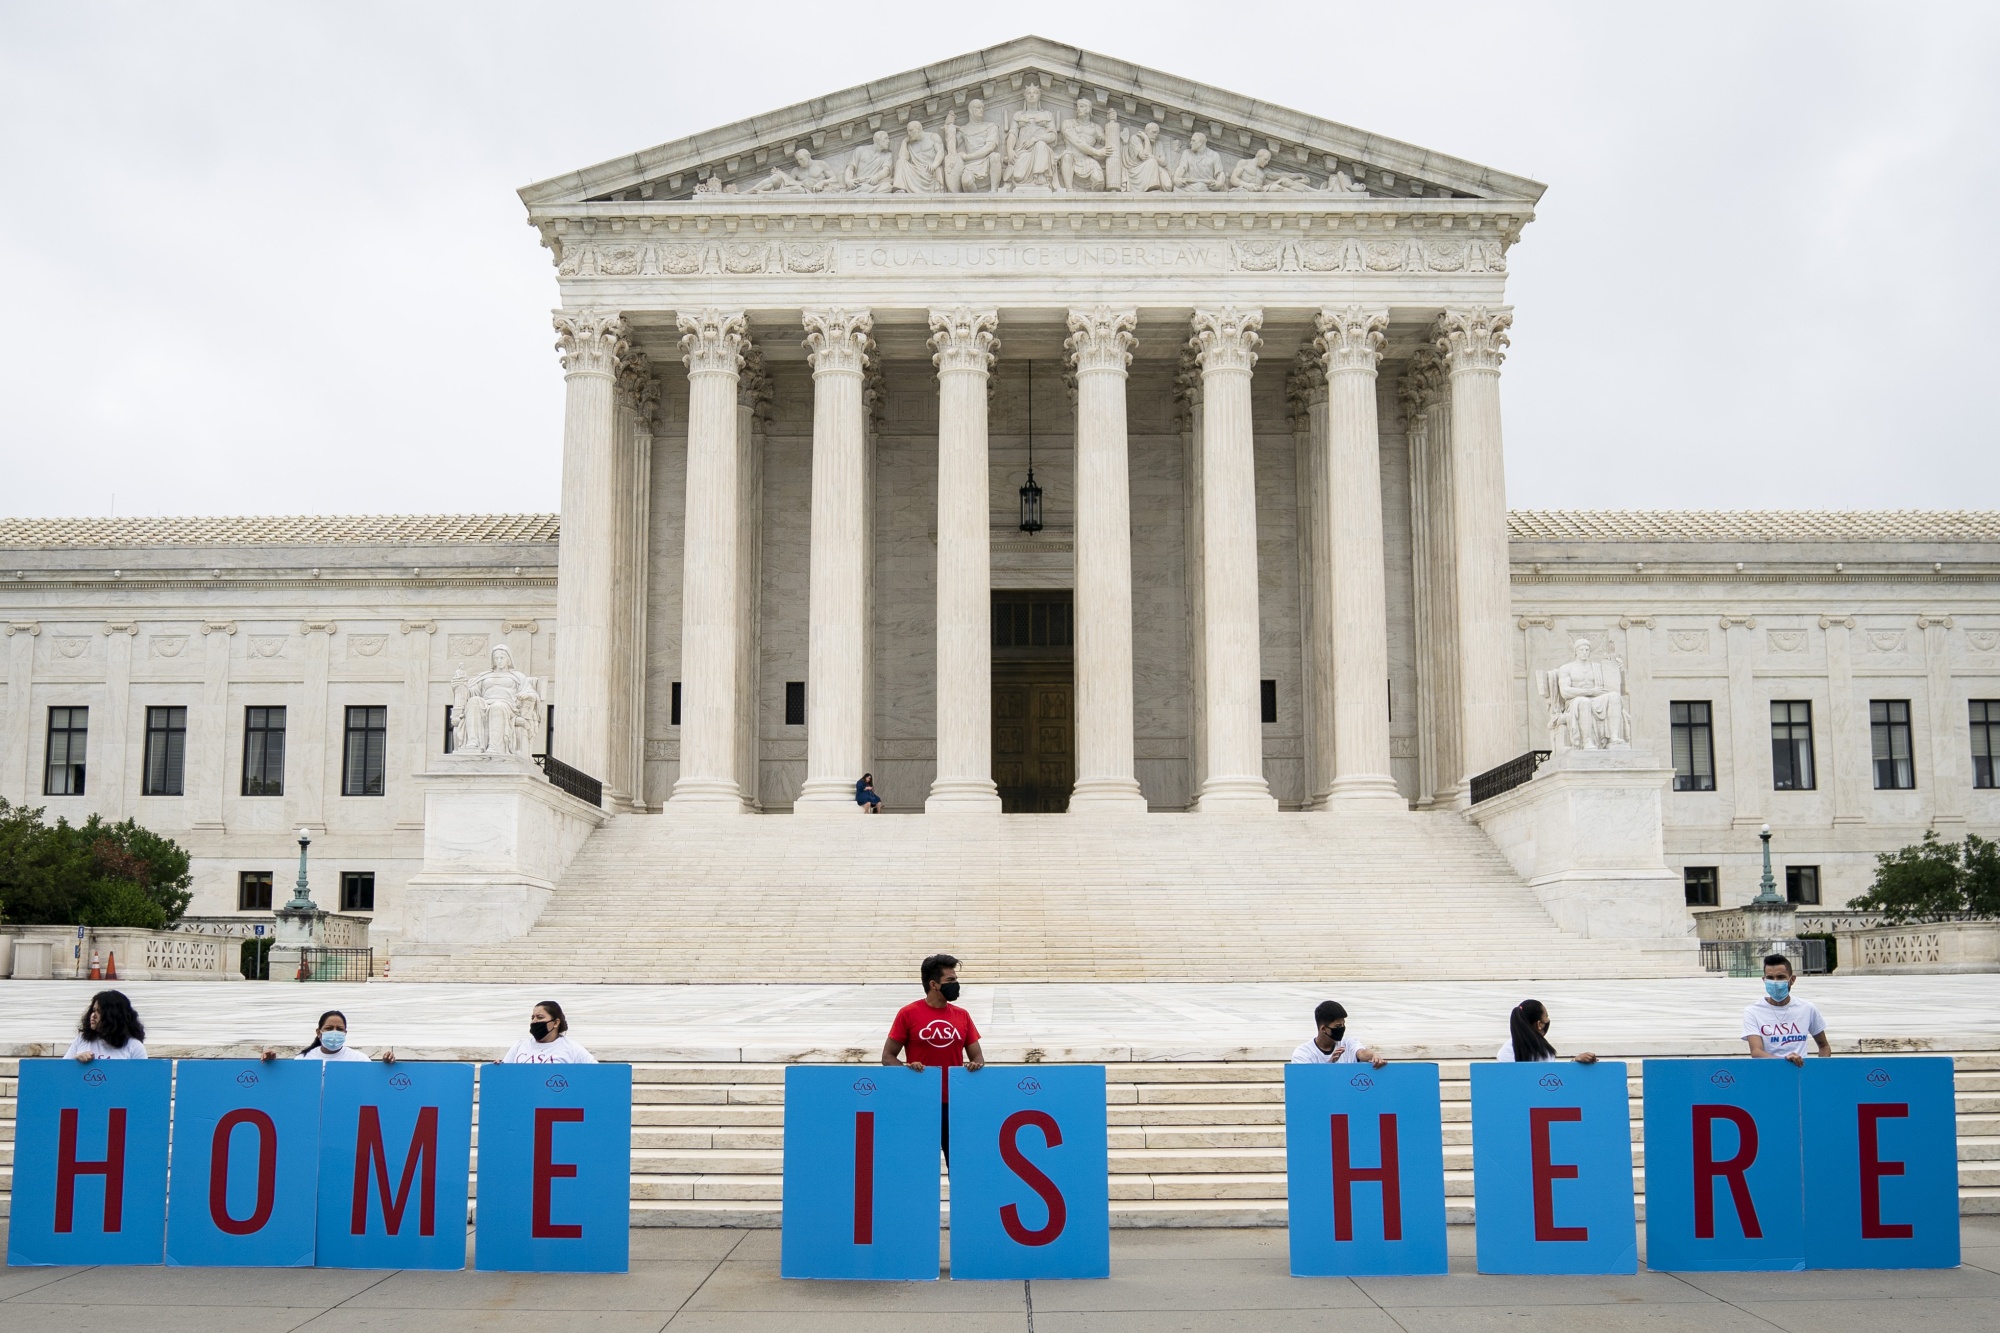 A rally outside the U.S. Supreme Court in June, when justices&nbsp;denied the Trump administration's attempt to end DACA, the Deferred Action for Childhood Arrivals program.&nbsp;